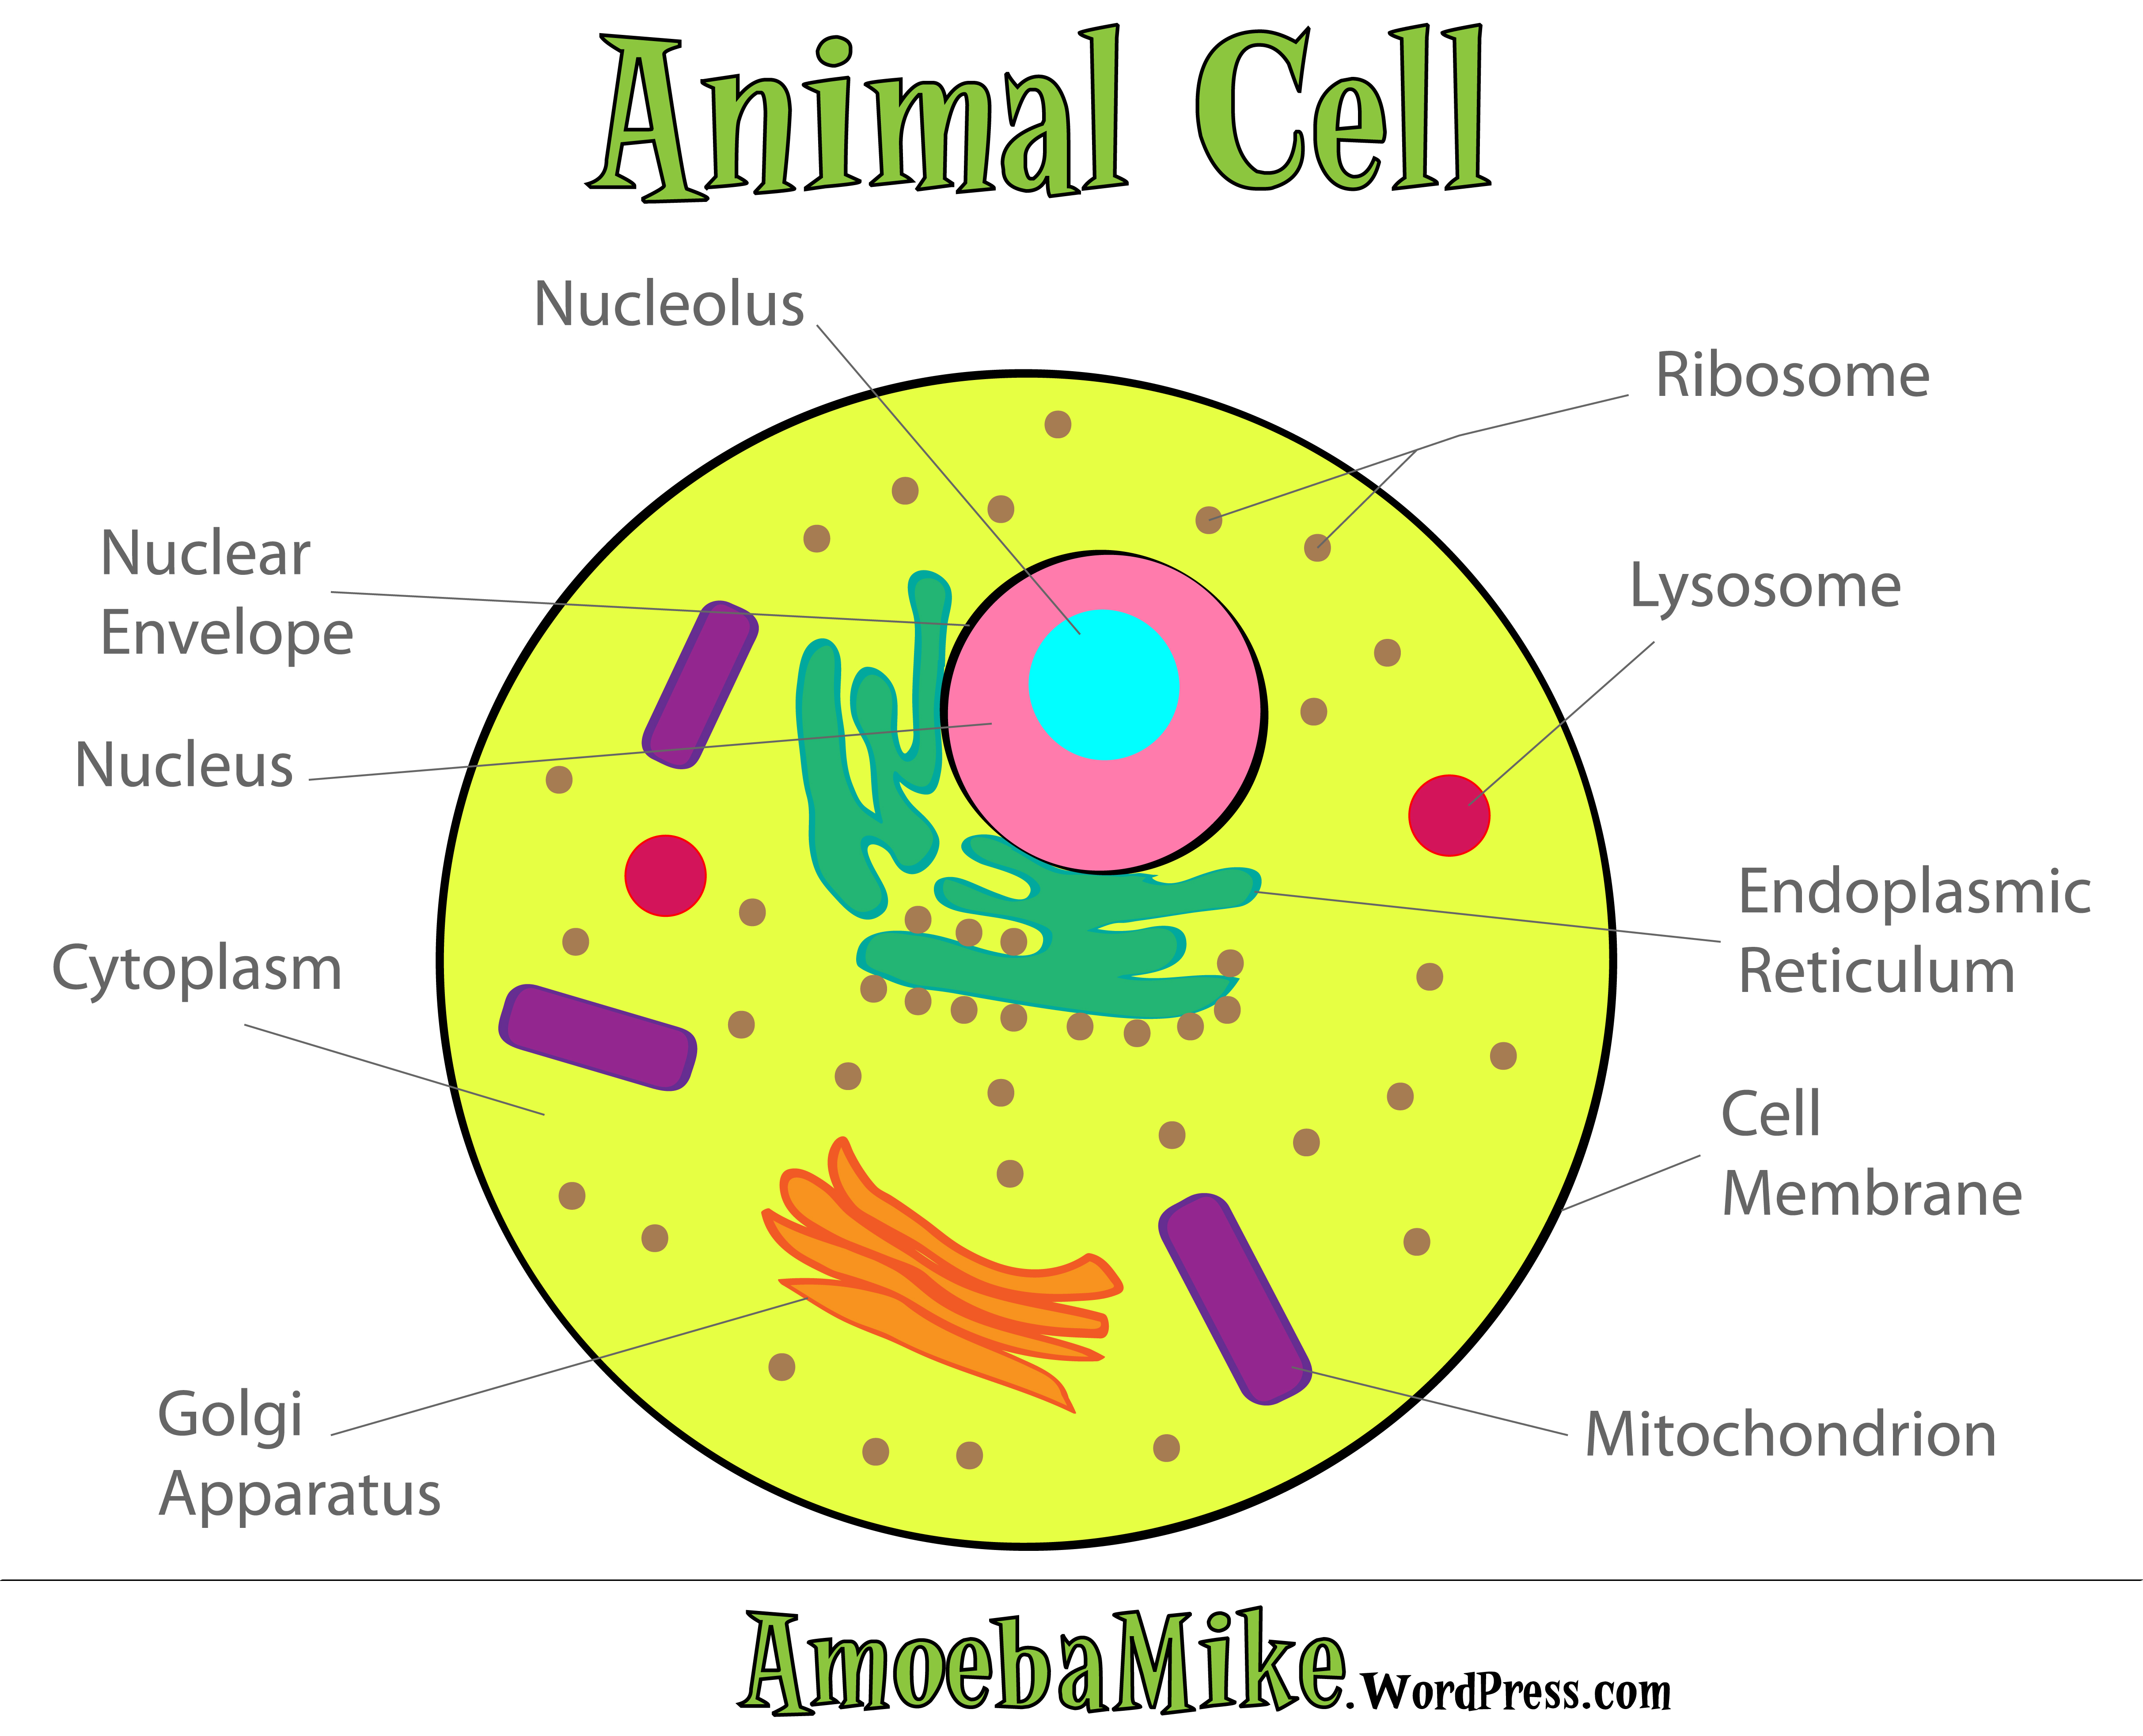 the-cell-amoebamike